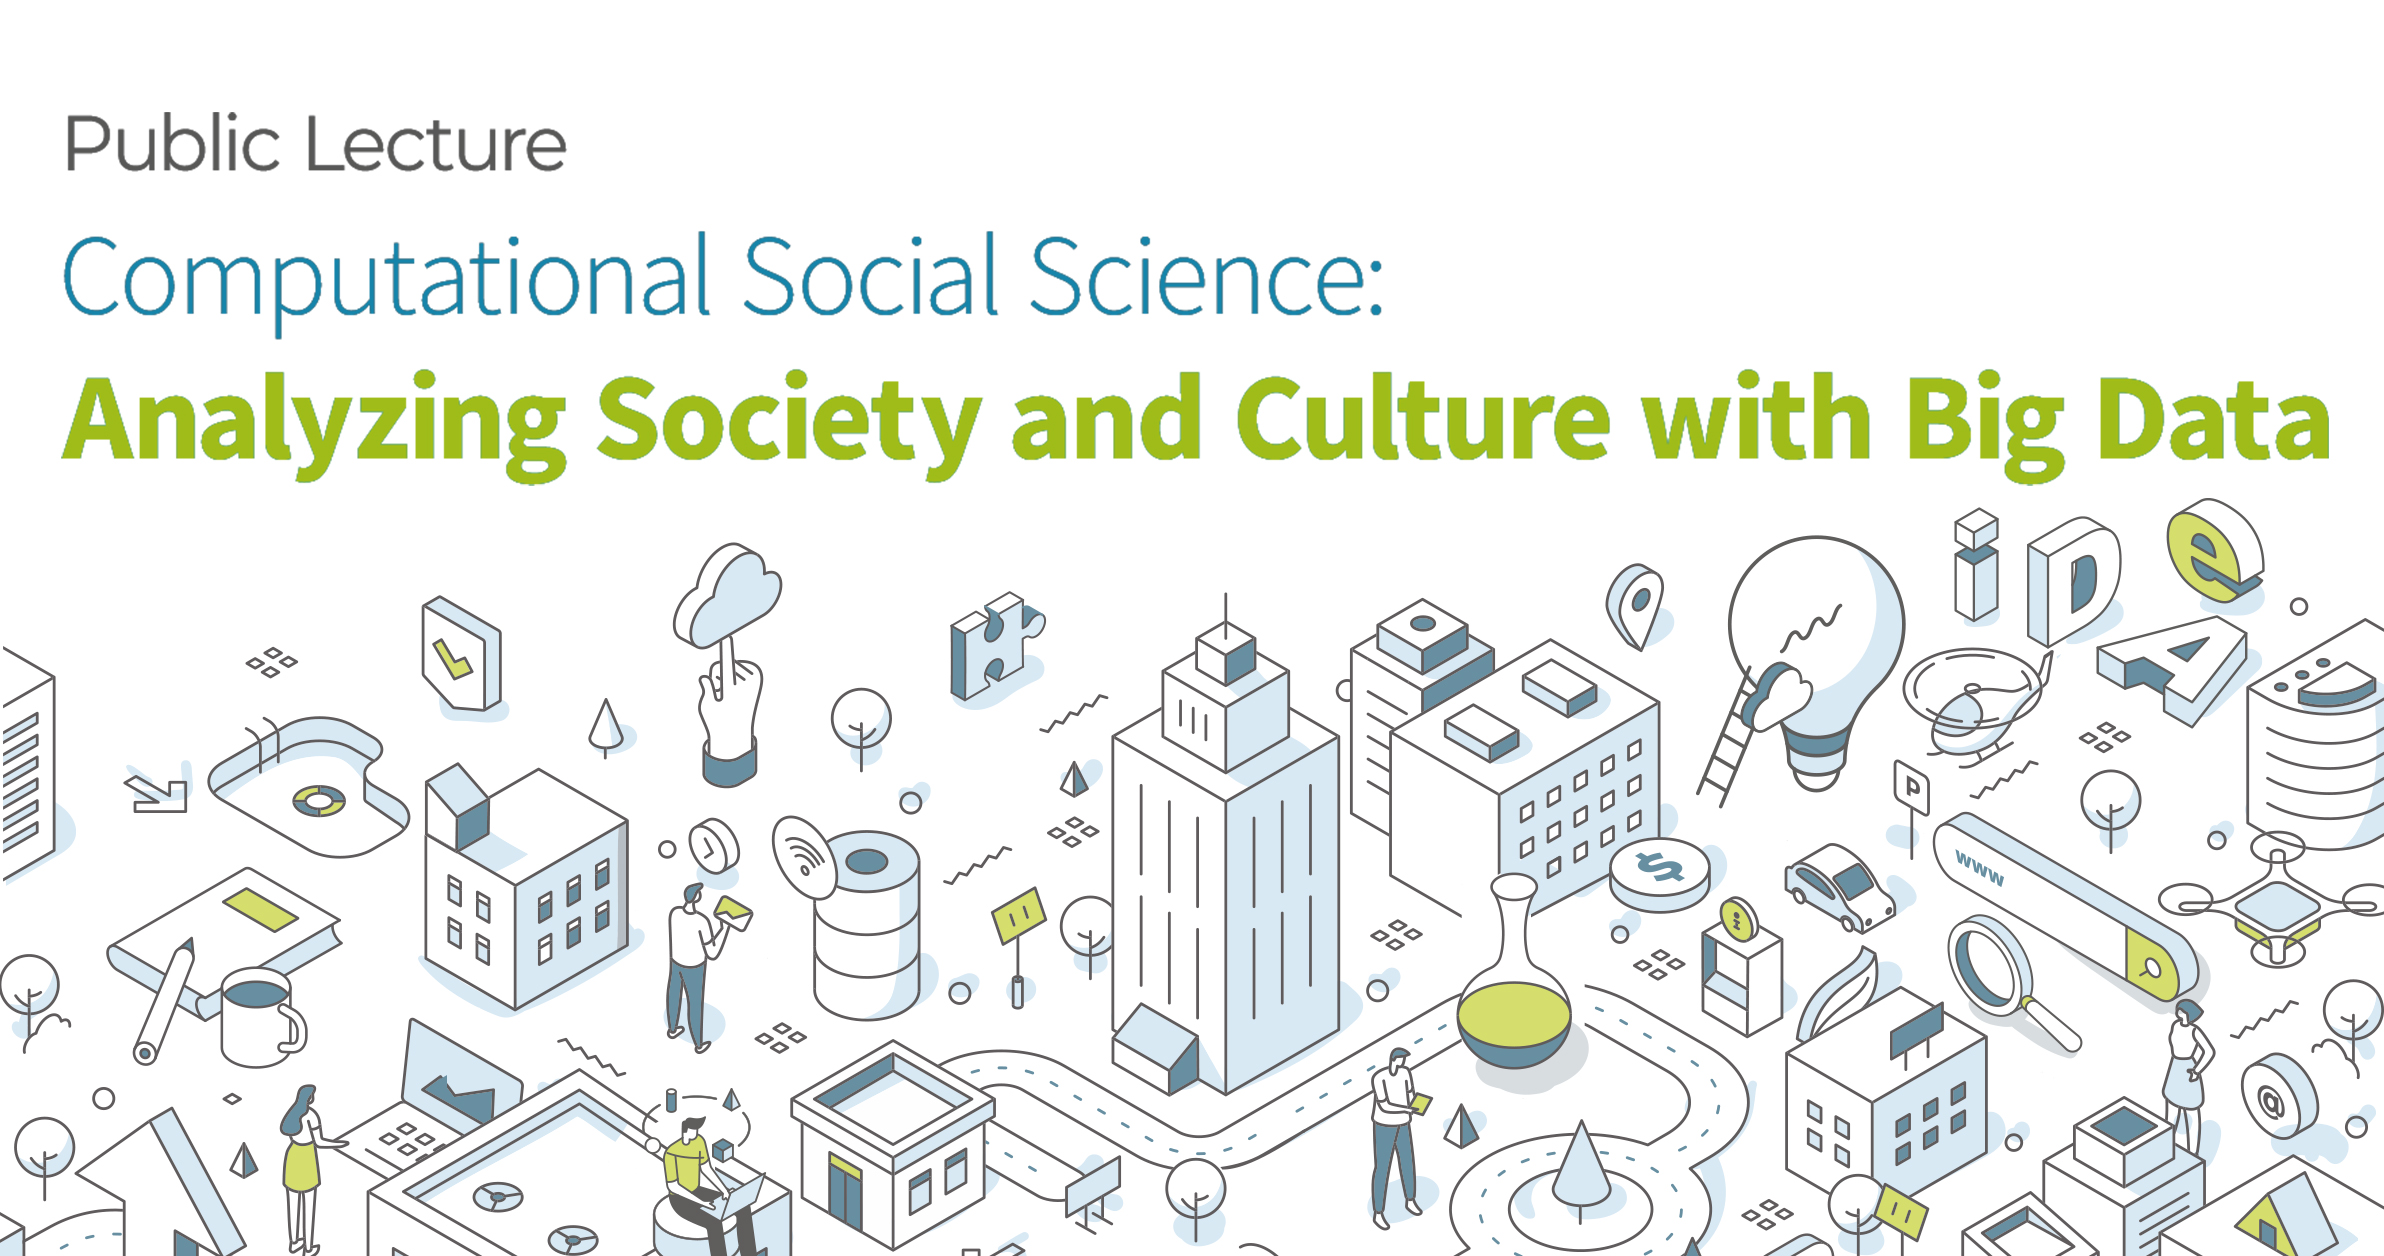 Public Lecture Computational Social Science: Analyzing Society and Culture with Big Data